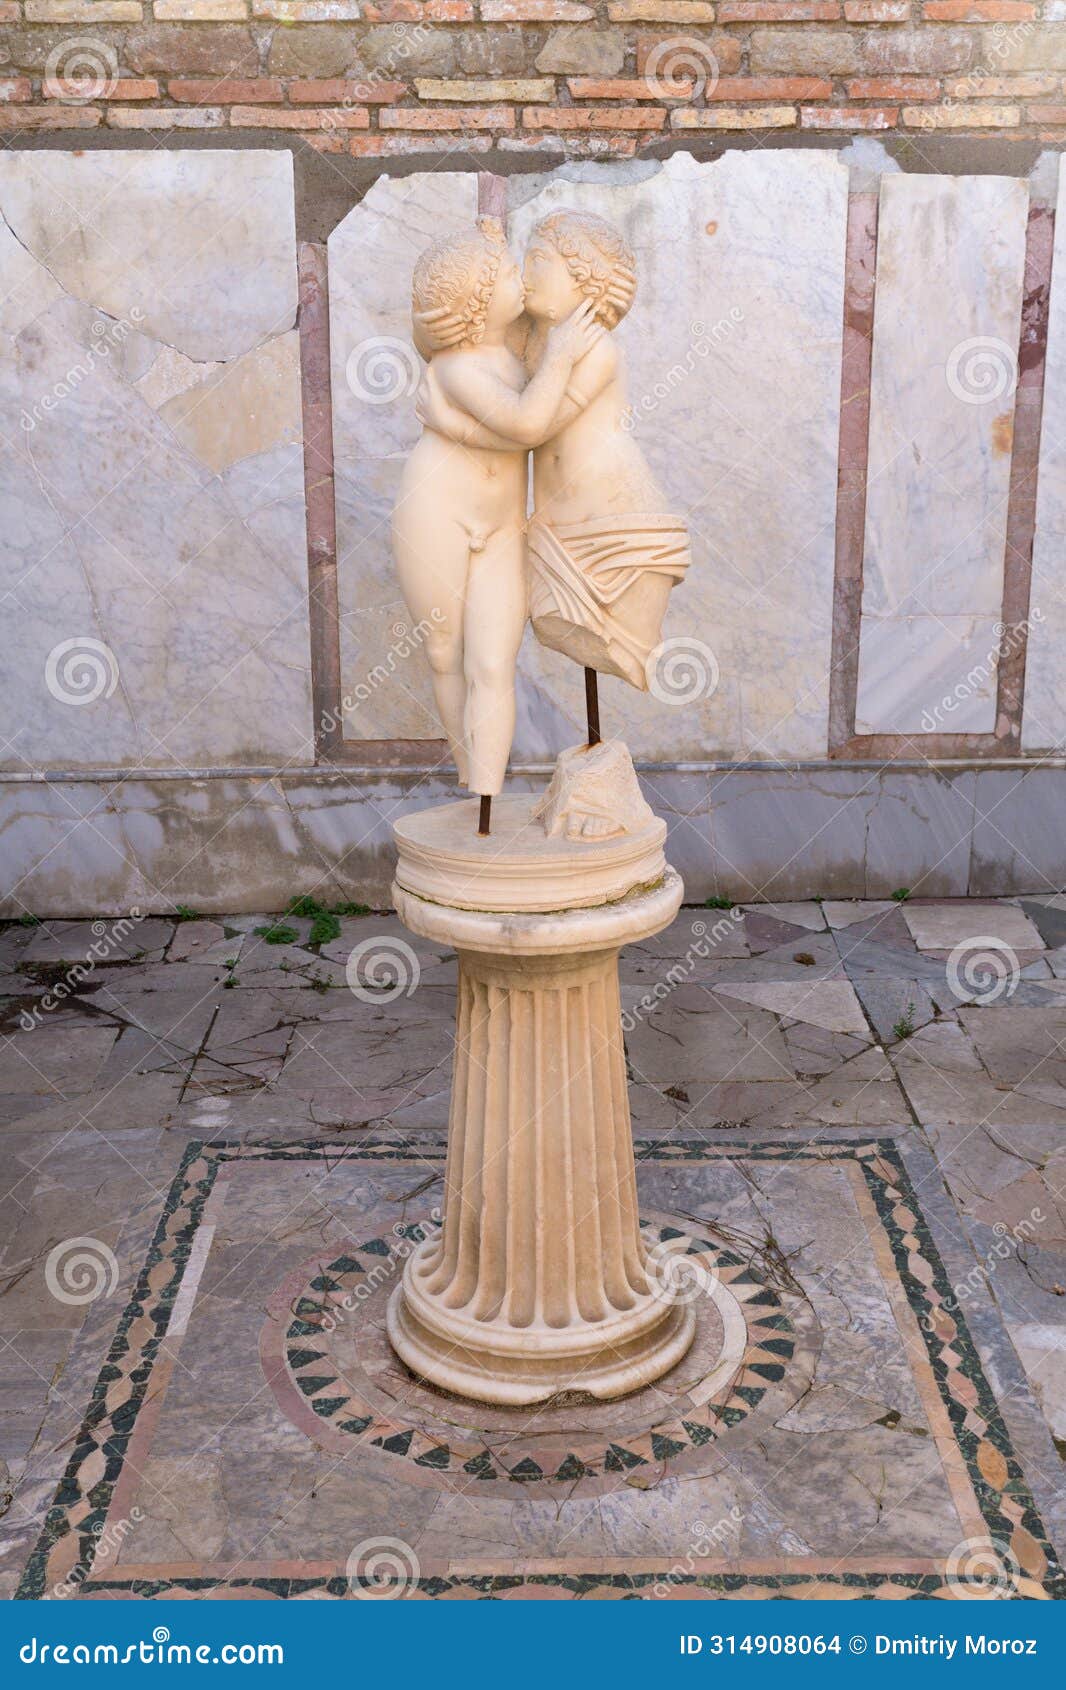 statue of cupido and psyche kissing in ostia antica